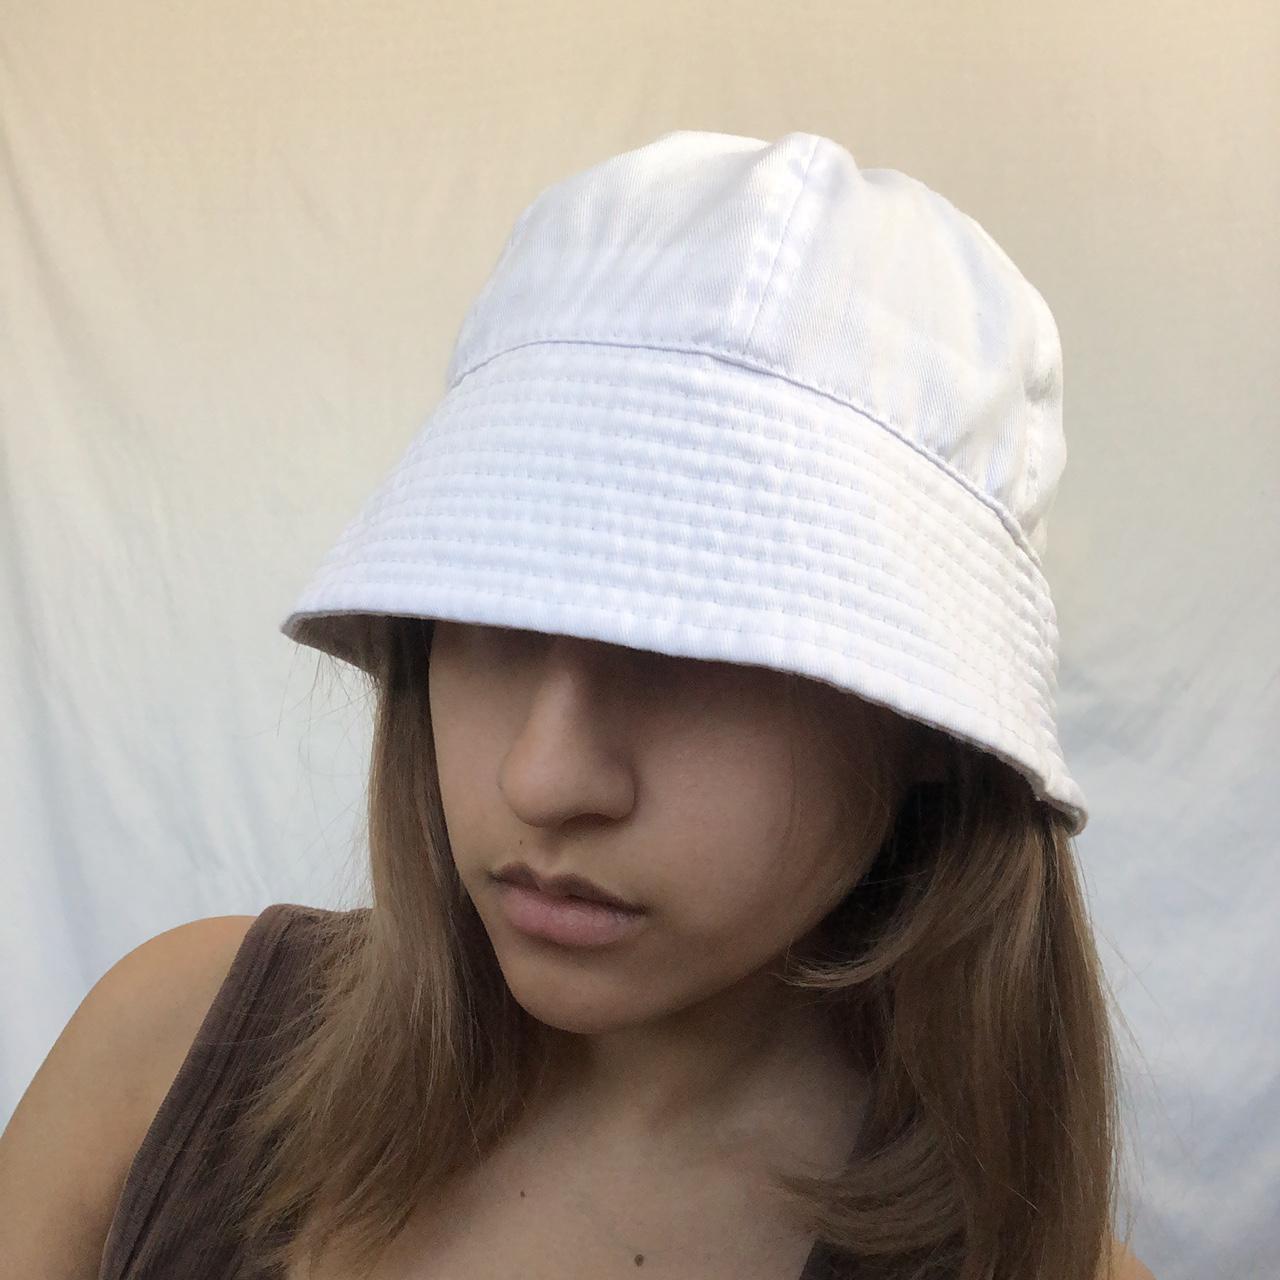 Product Image 4 - White bucket hat
+$4.05 ship 

Unbranded